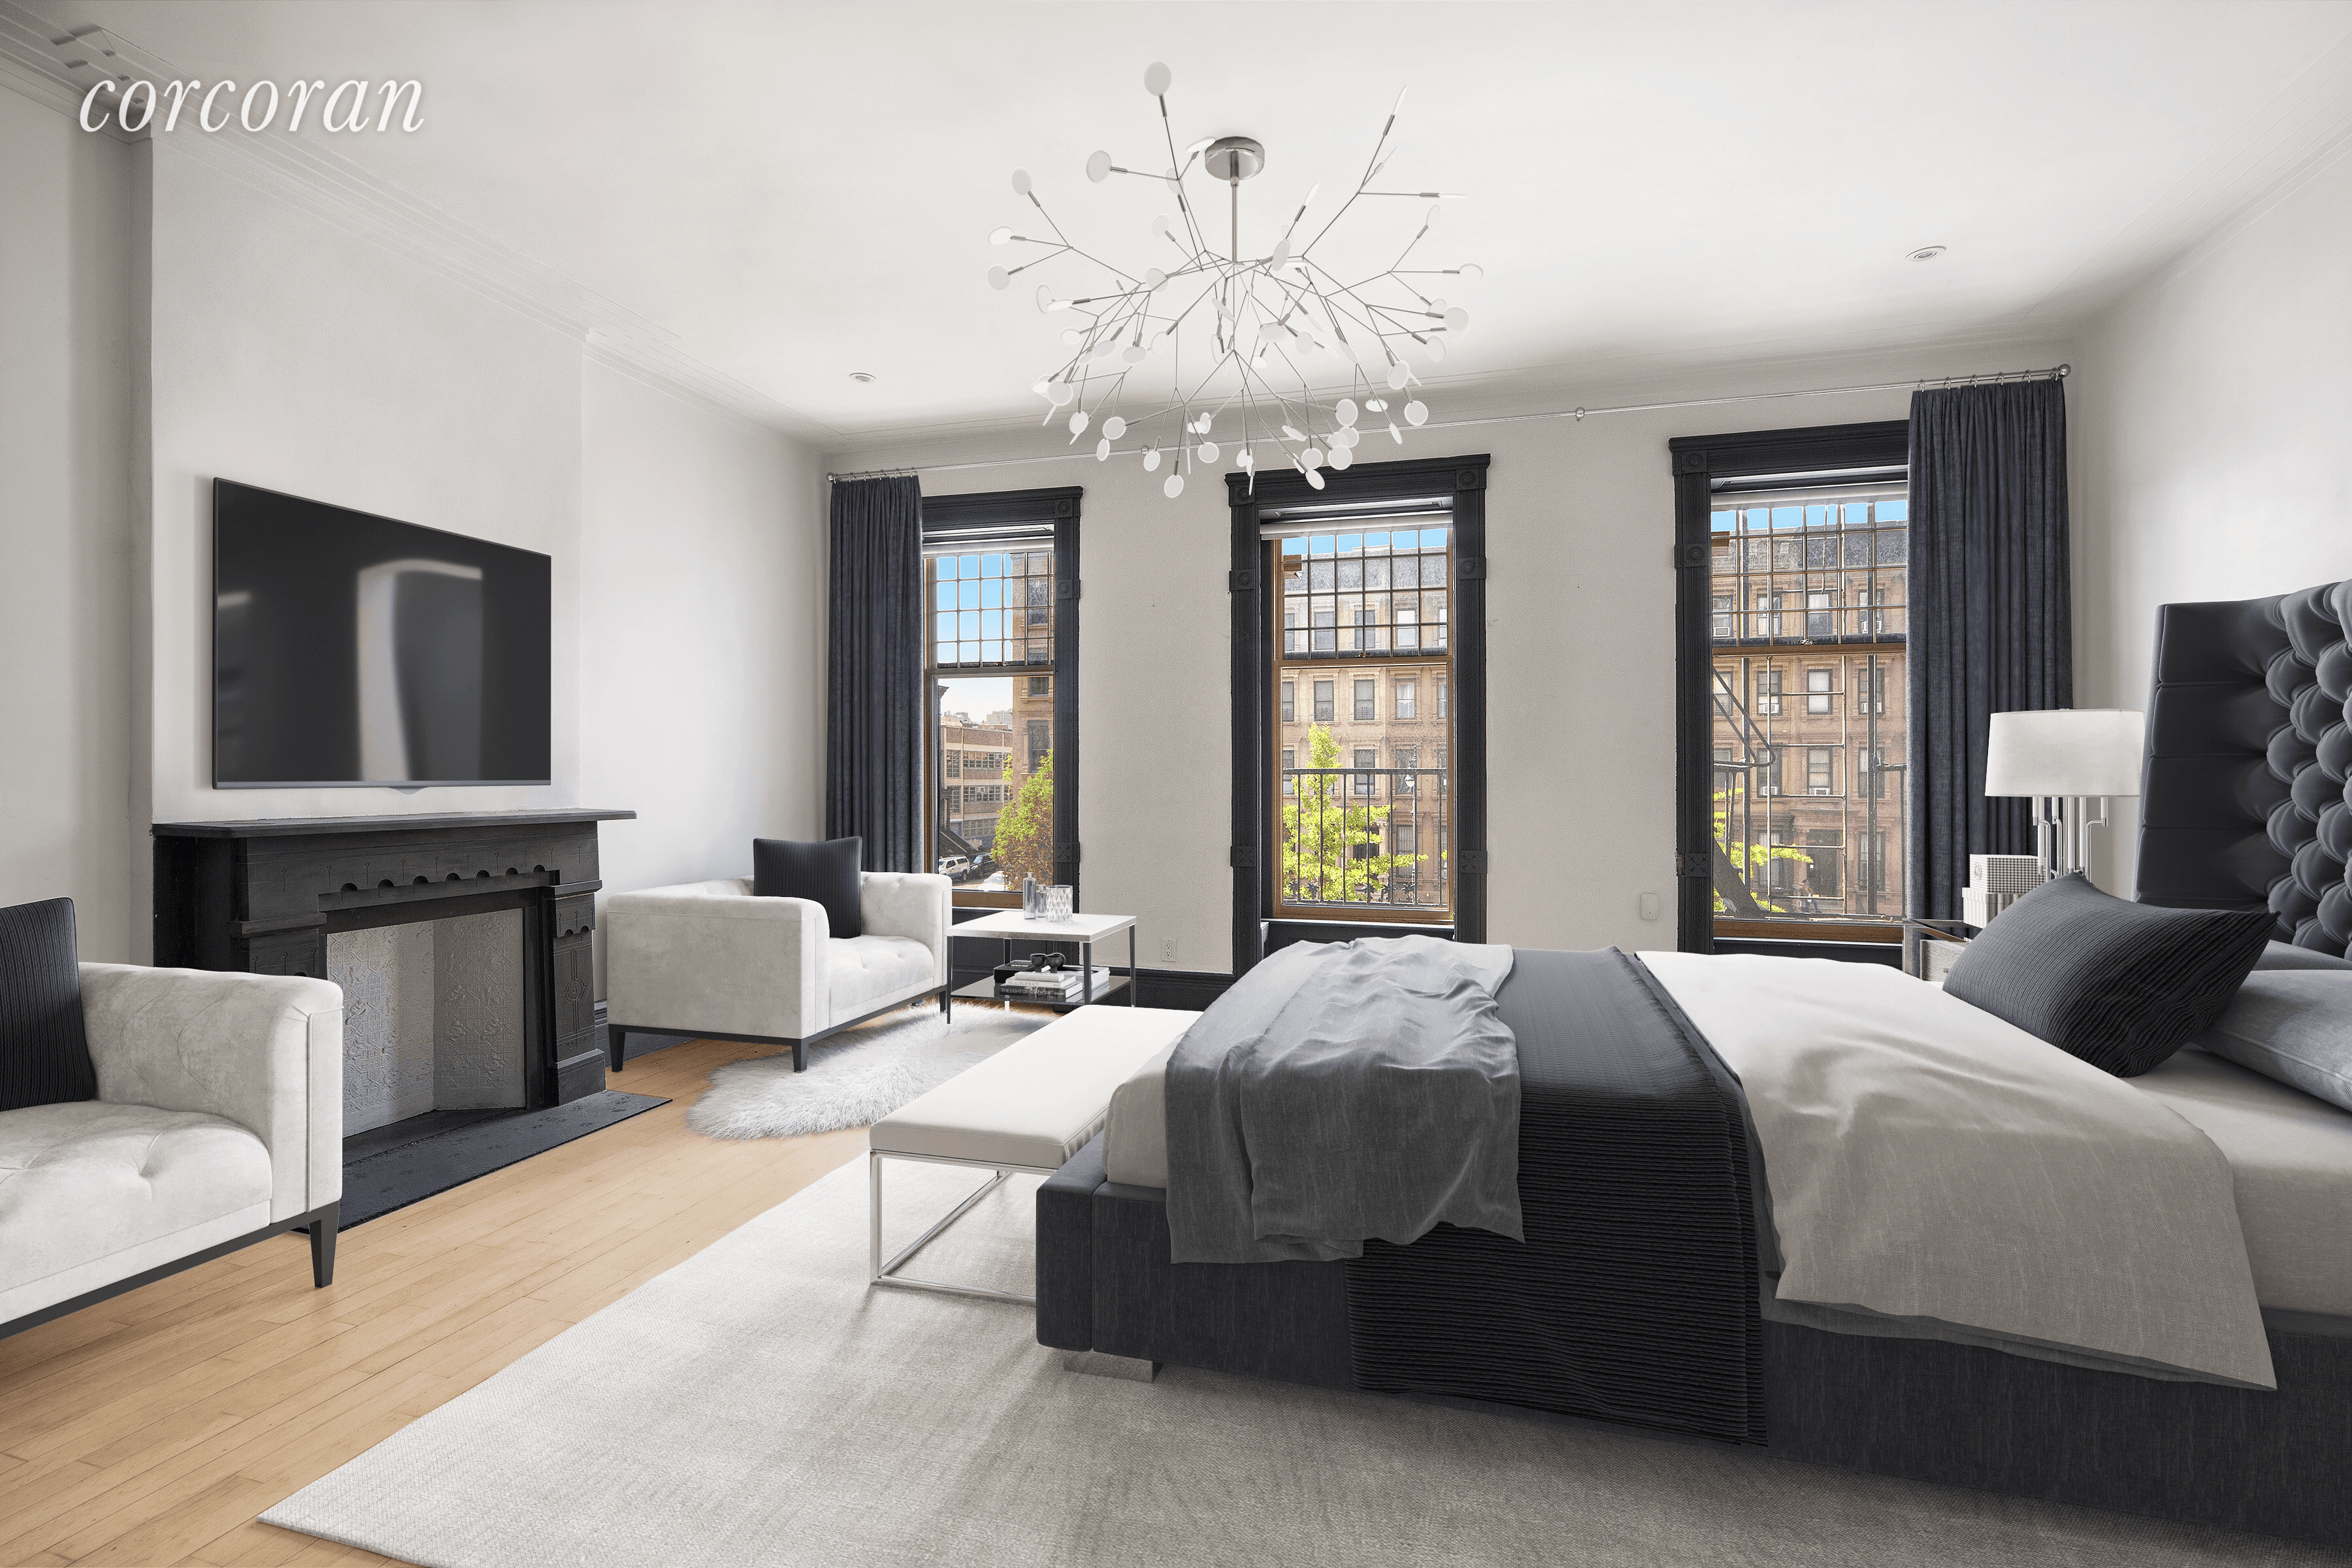 Welcome to 246 Lenox Avenue this 22 foot wide home is 7, 000 square feet spread across 5 floors not including the cellar boasting 13 feet high ceilings on the ...